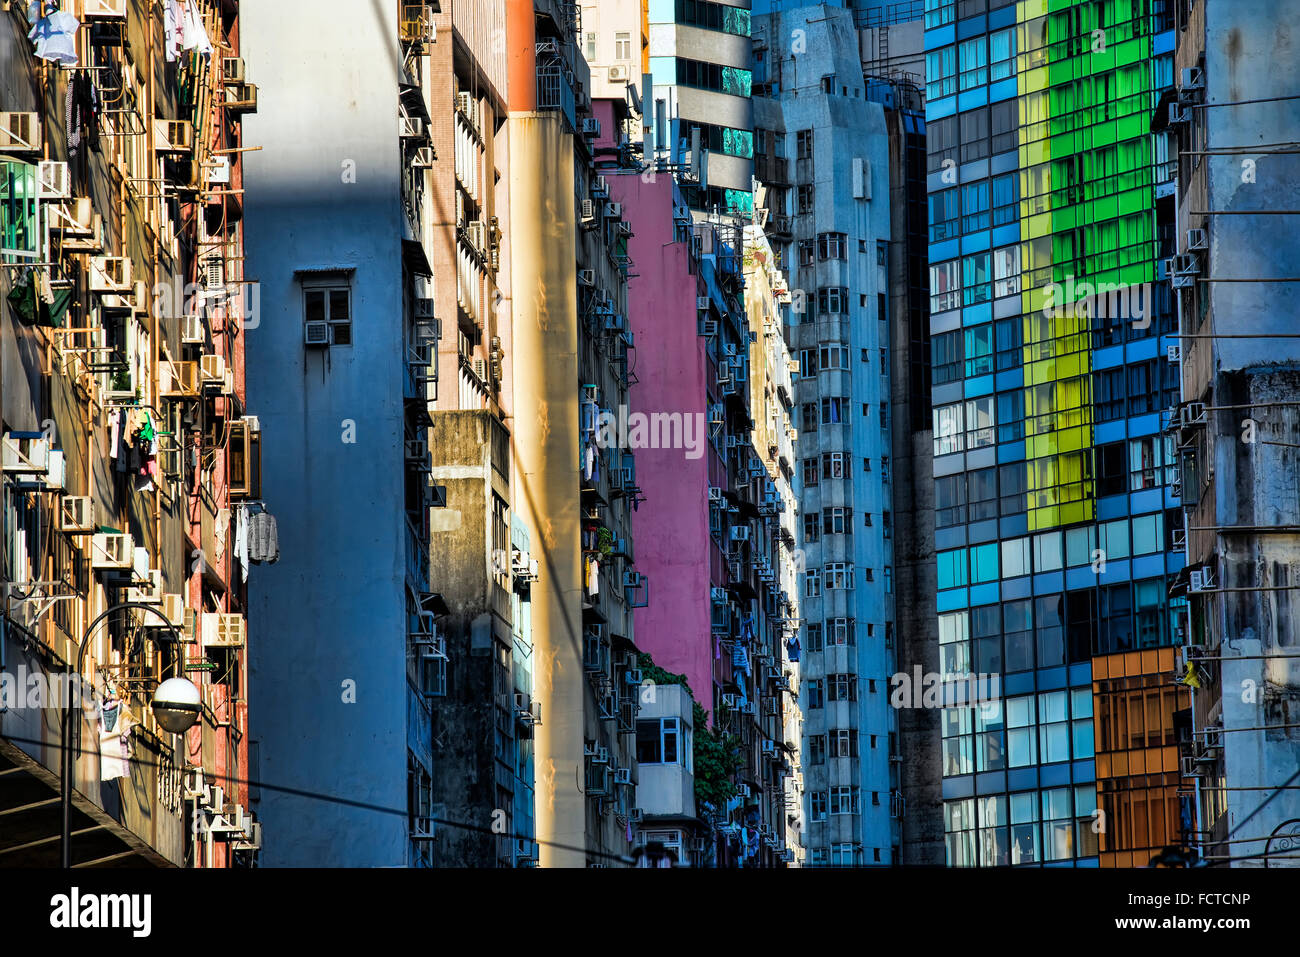 Exteriors of over crowded old buildings and new skyscrapers in Hong Kong, China. Stock Photo